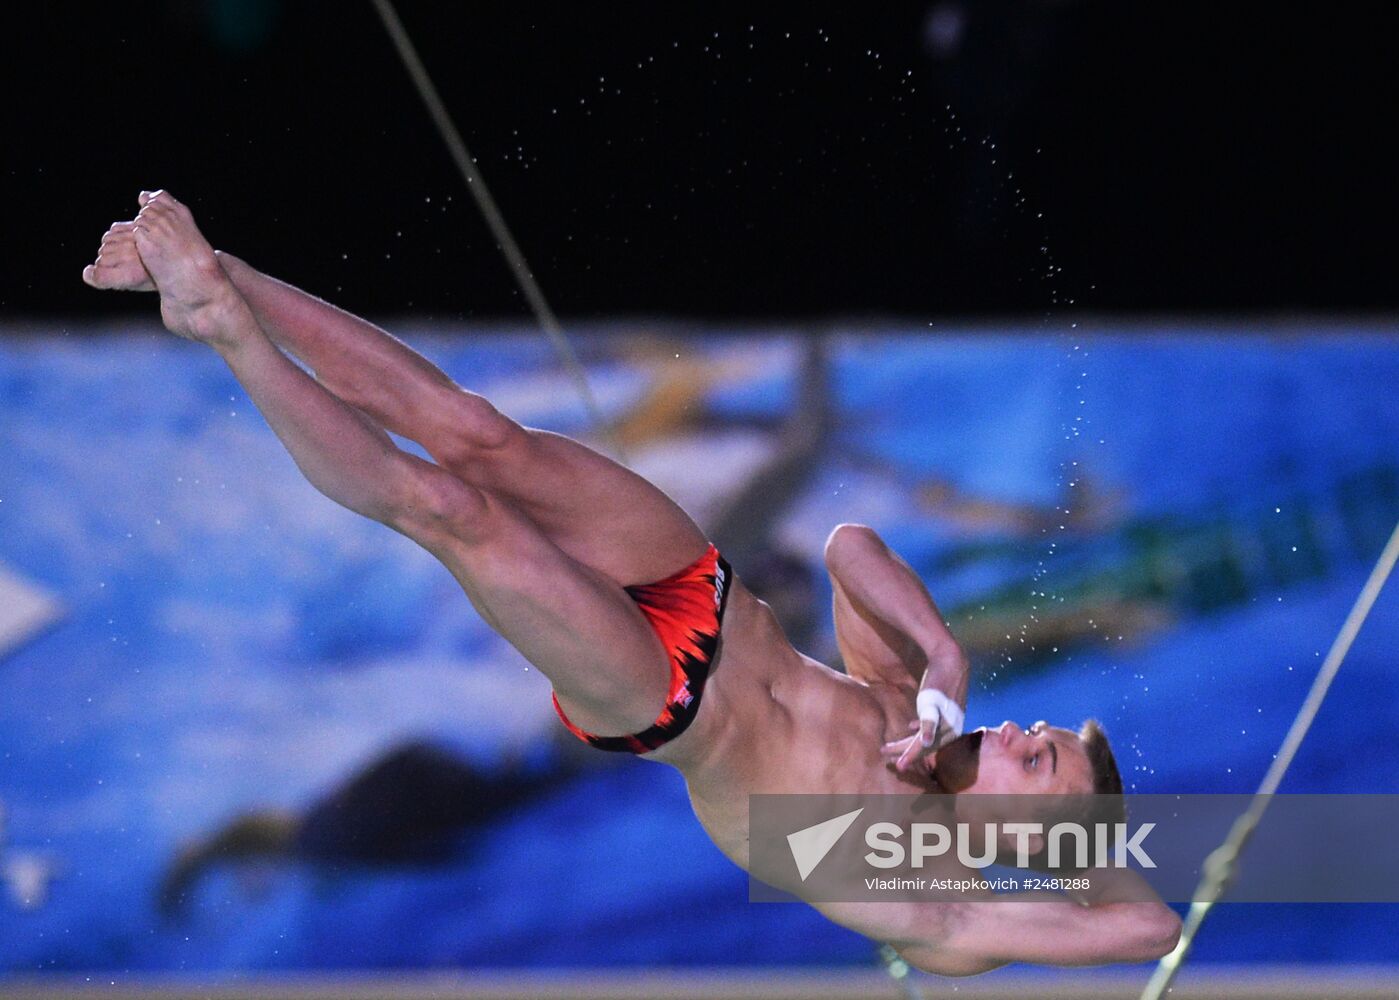 European Swimming Championships. Day Eleven